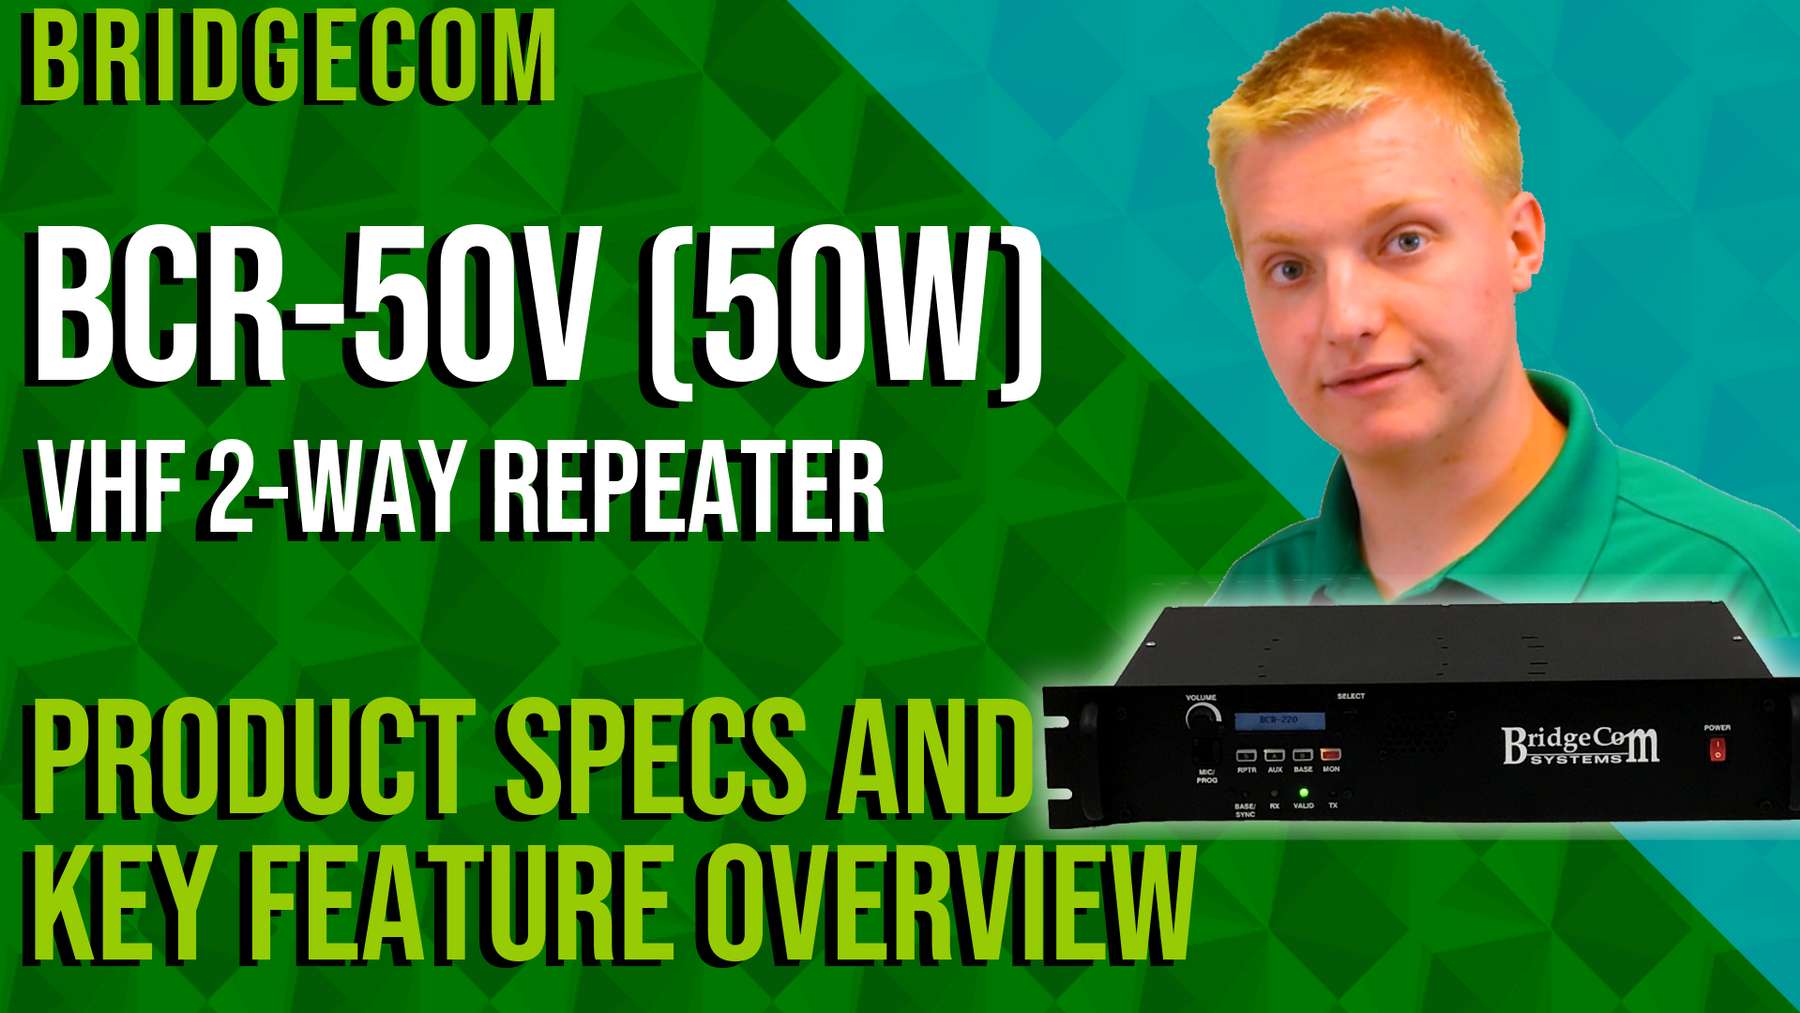 BridgeCom BCR-50V VHF (50W) 2-Way Repeater Product Specs and Key Feature Overview